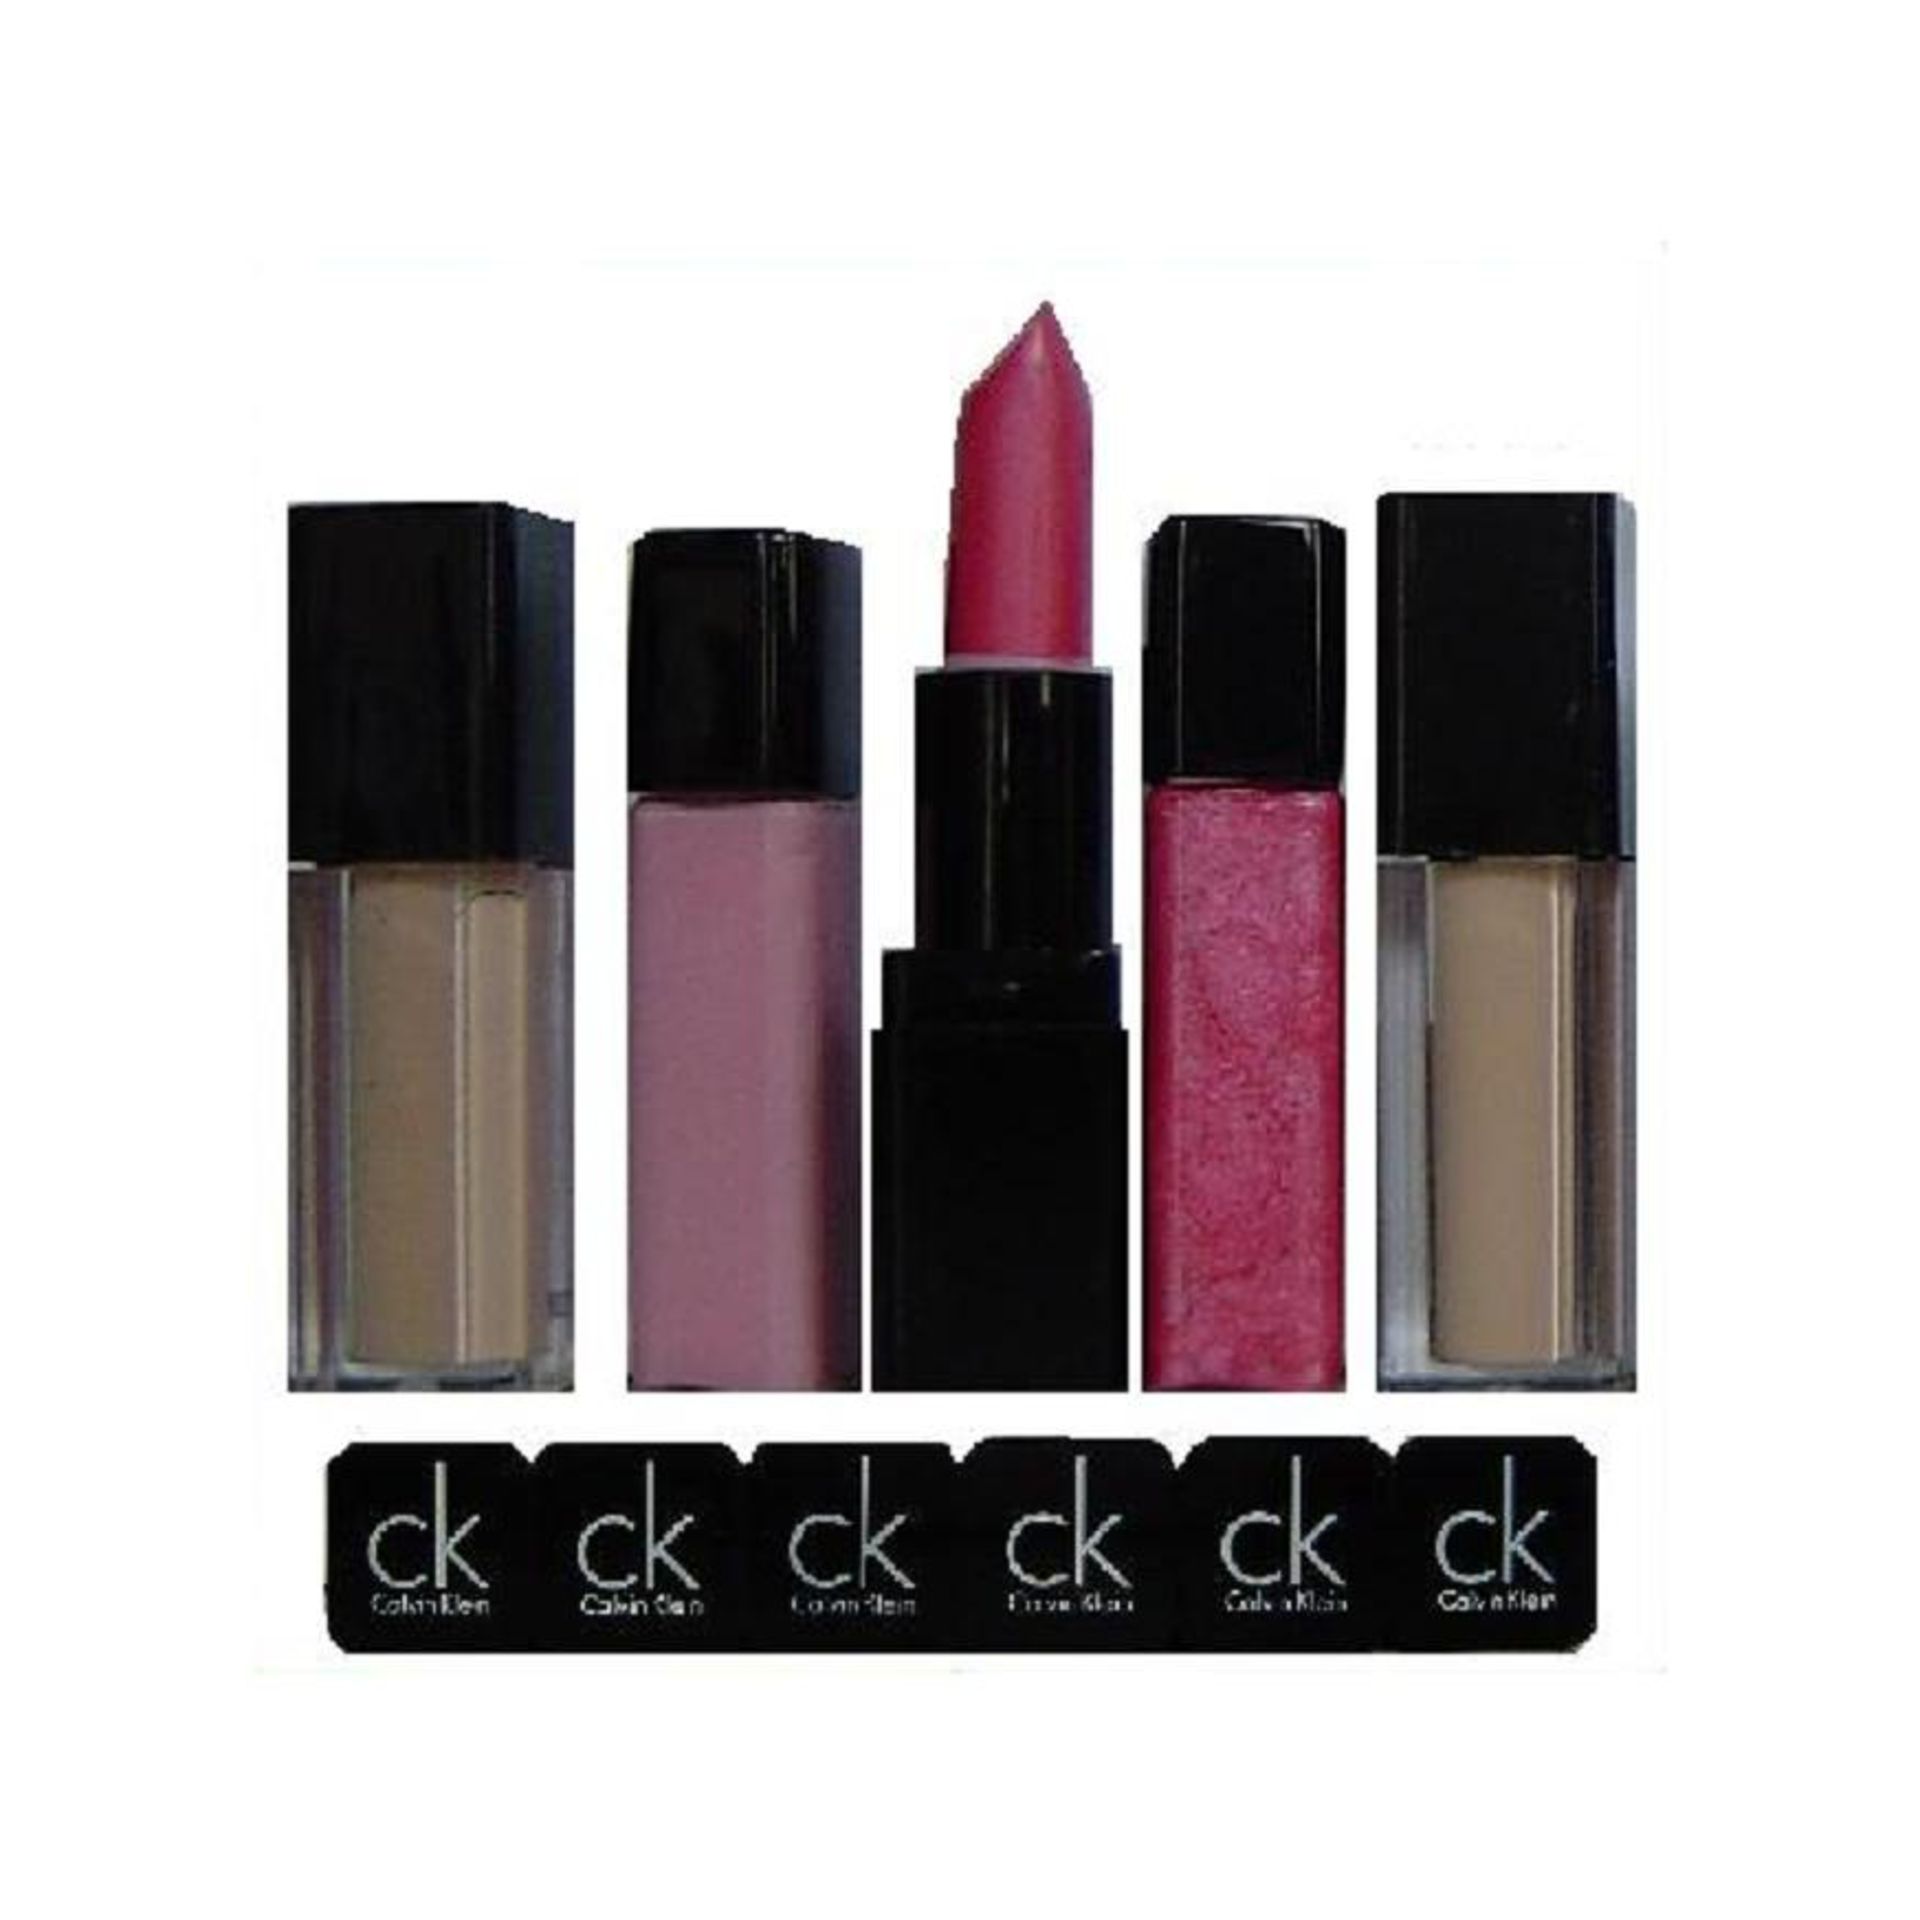 200 x mini ck cosmetics-3 shades and 3 types – NO VAT + FREE DELIVERY